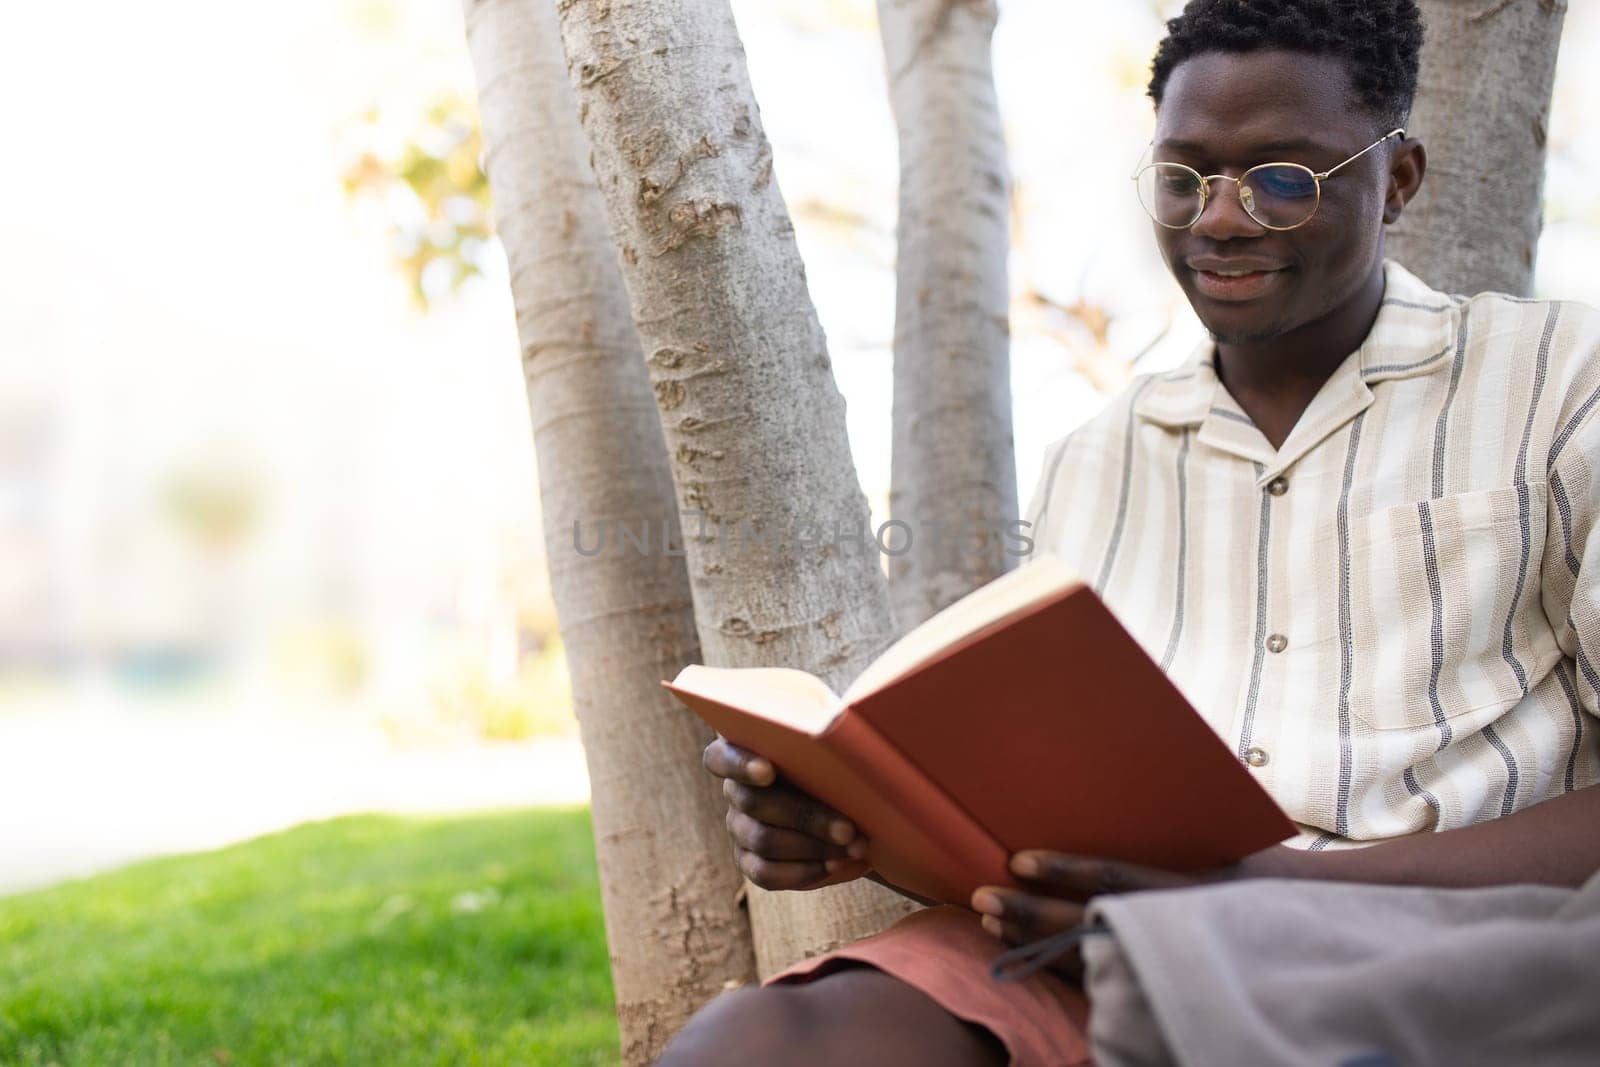 African american college student reading book on campus. Young black man reading book outdoors. Copy space. Education concept.